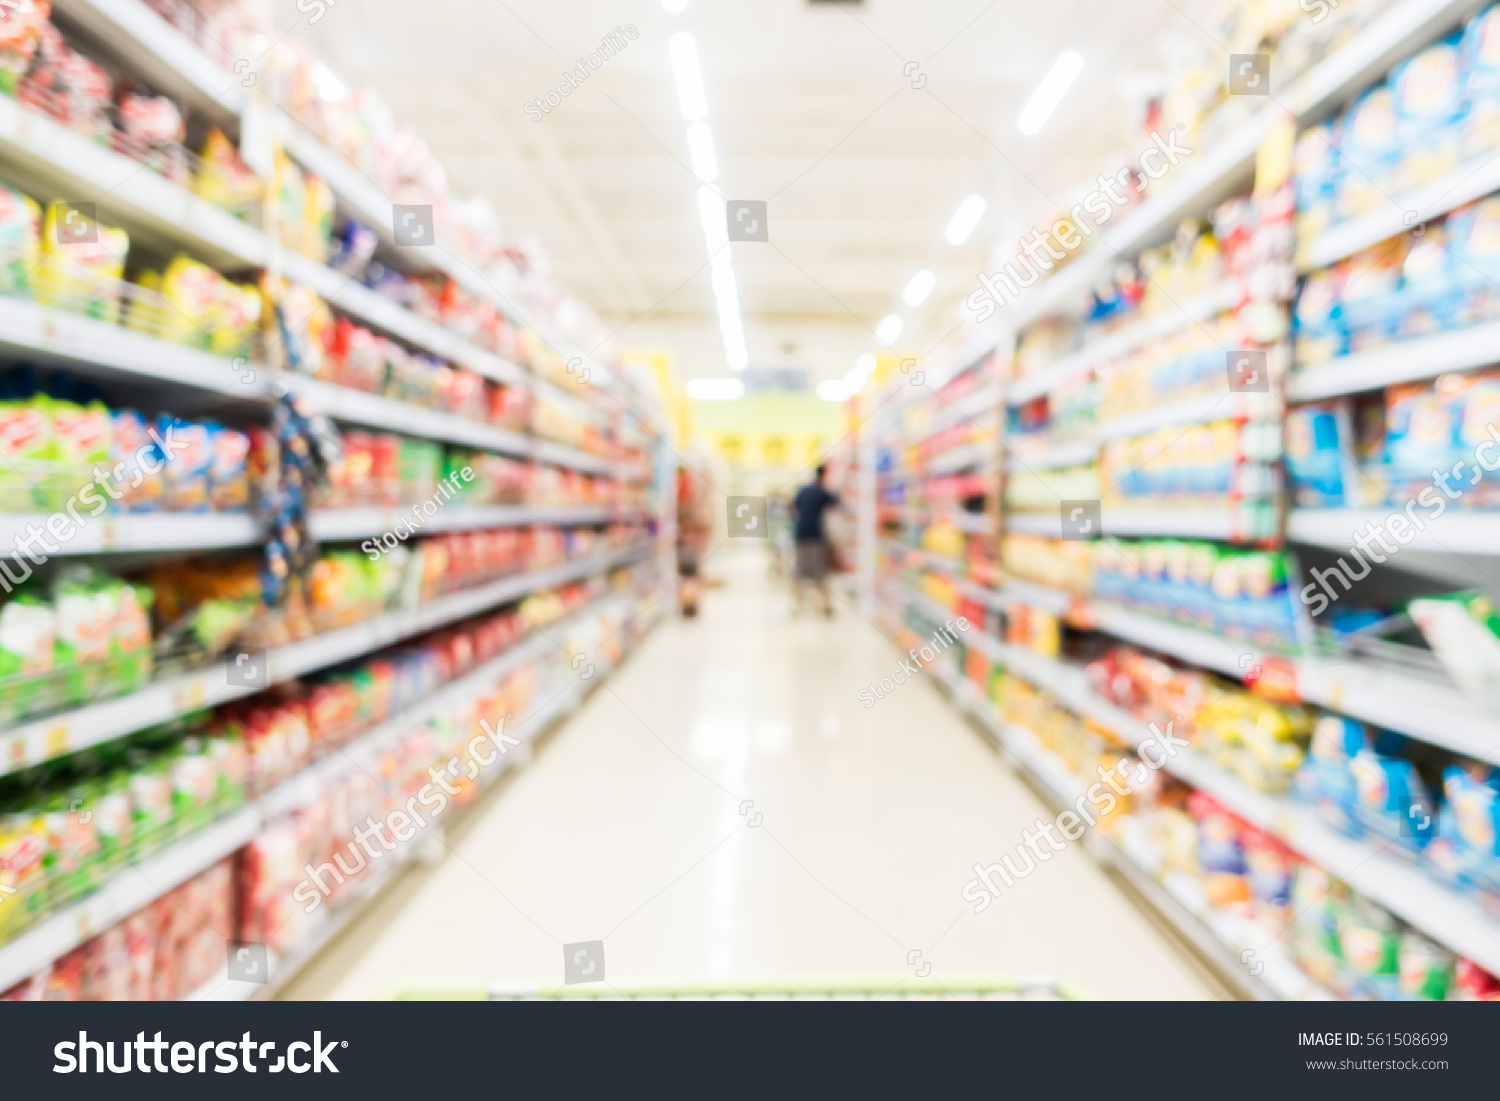 Abstract blur supermarket and retail store in shopping mall interior for background #561508699